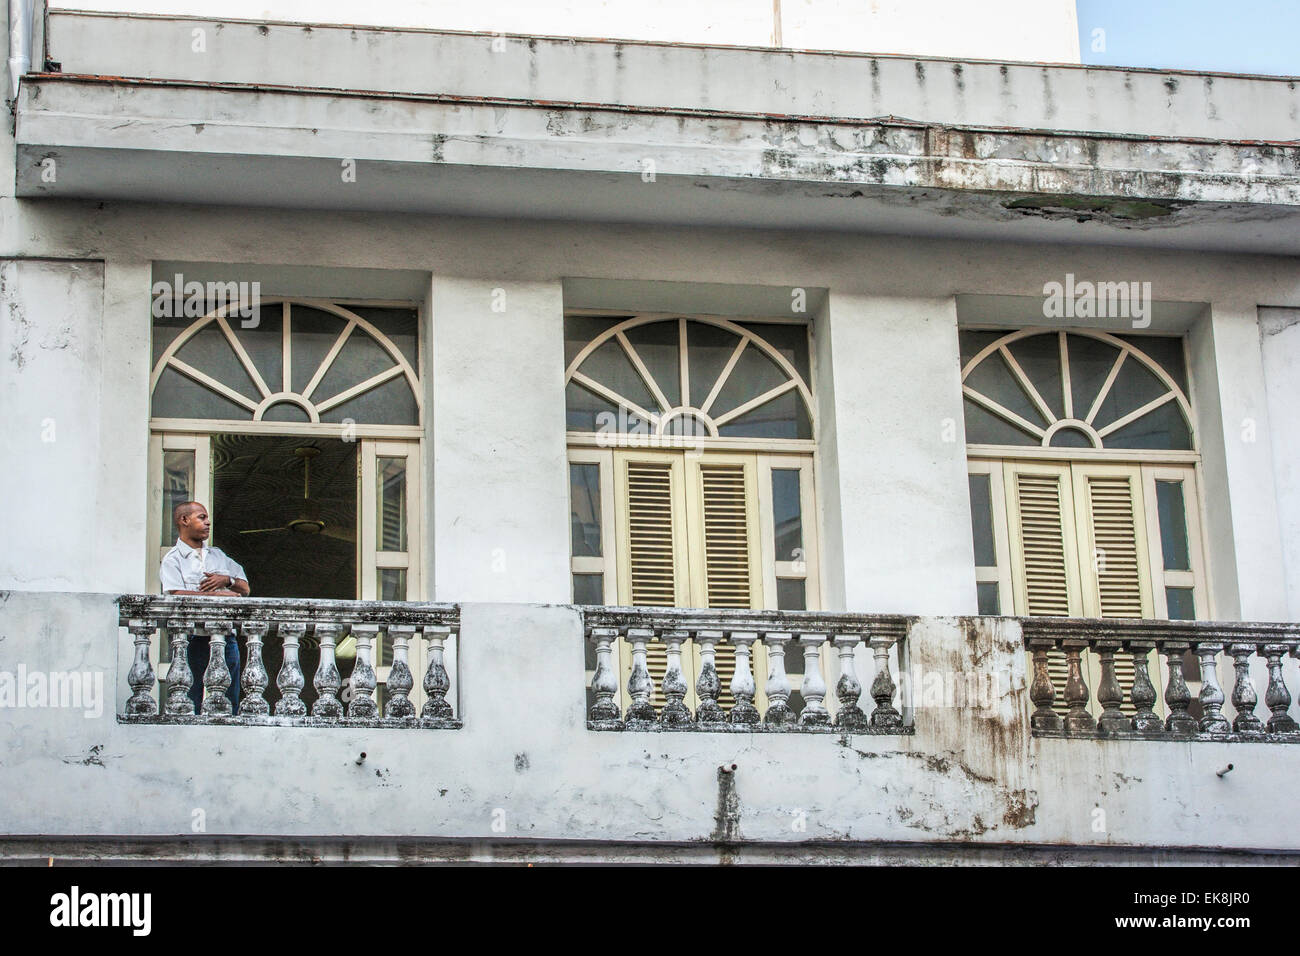 Man on one of three balconies of a build with wonderful architecture but in need of repair in Old Havana in Cuba Stock Photo